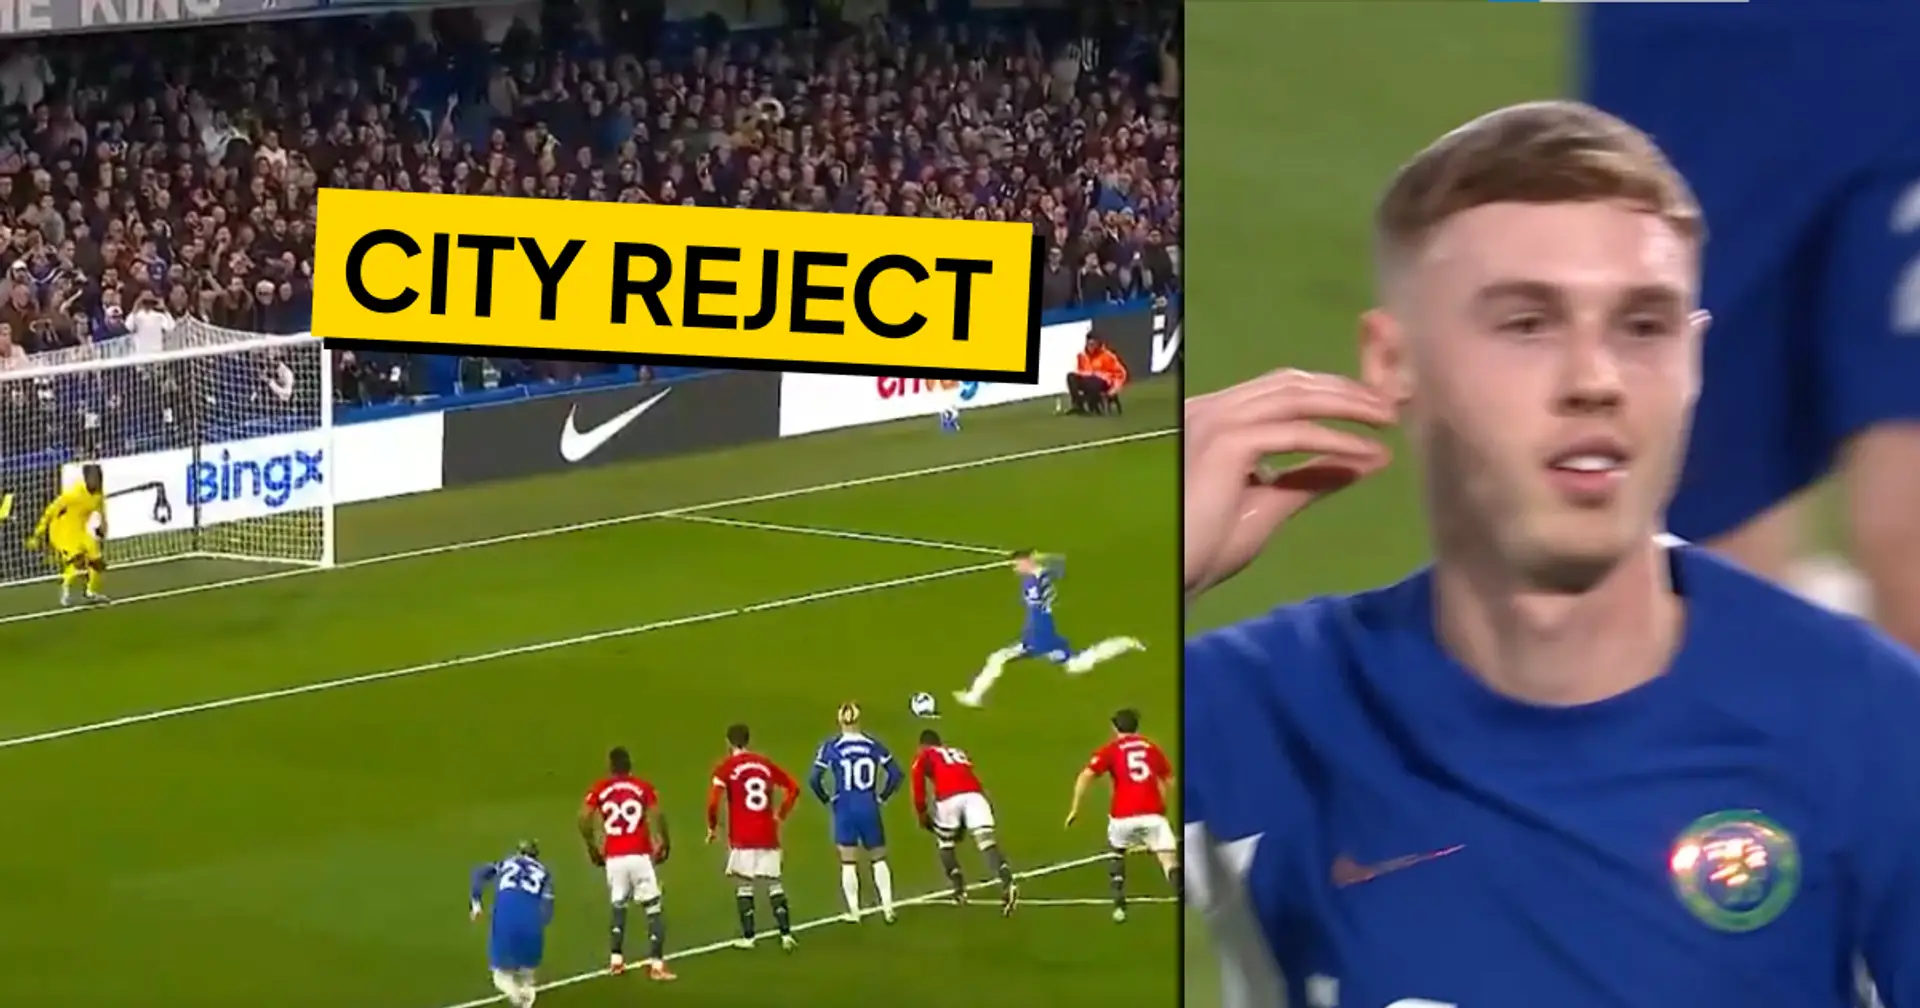 Man United fans aim 'City reject' chants at Palmer – he shuts them down with goal and celebration